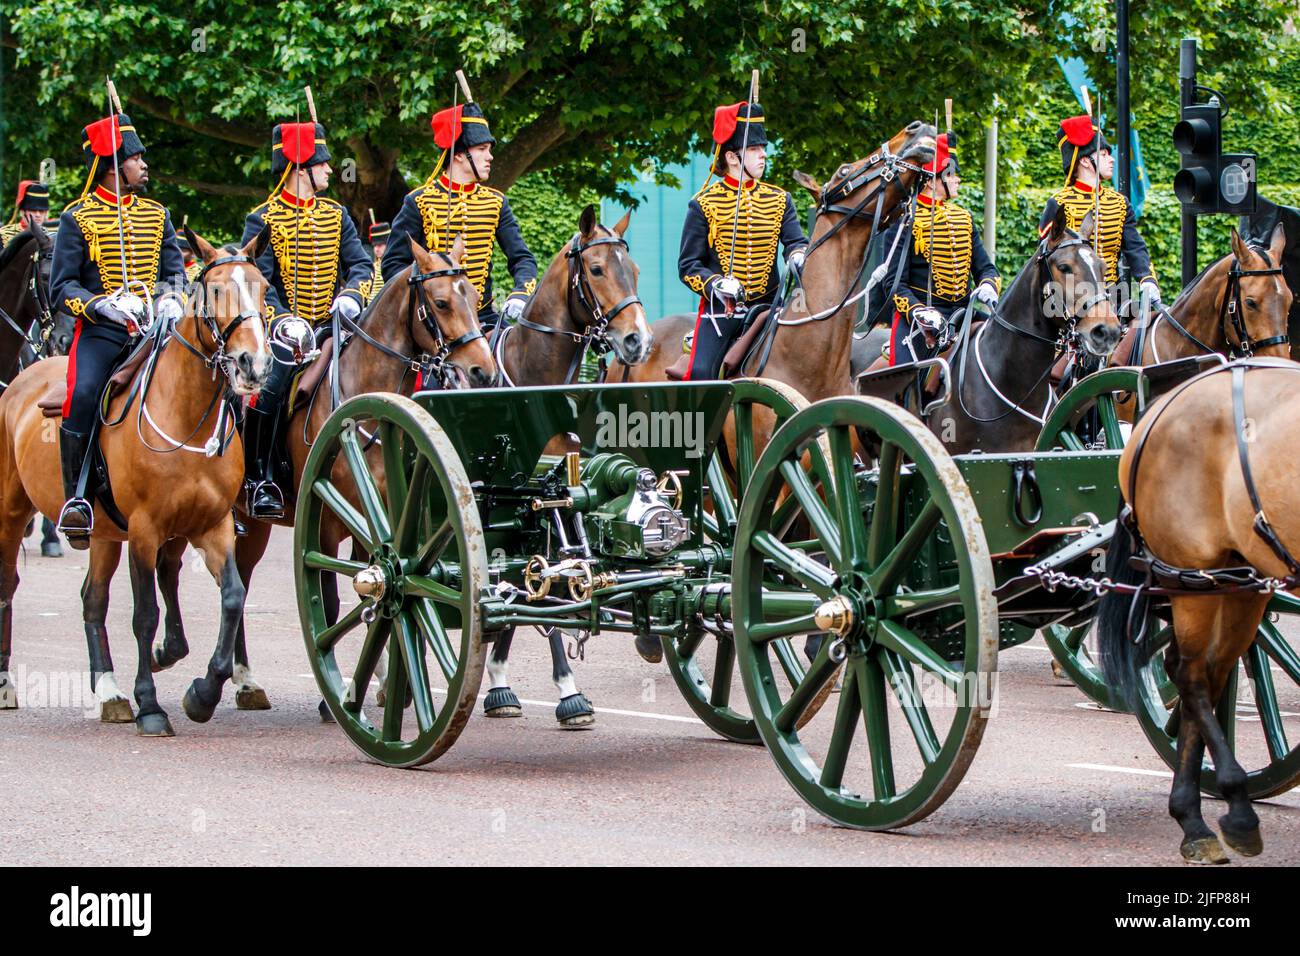 The King’s Troop, Royal Horse Artillery at Trooping the Colour, Colonel’s Review in The Mall, London, England, United Kingdom on Saturday, May 28, 202 Stock Photo